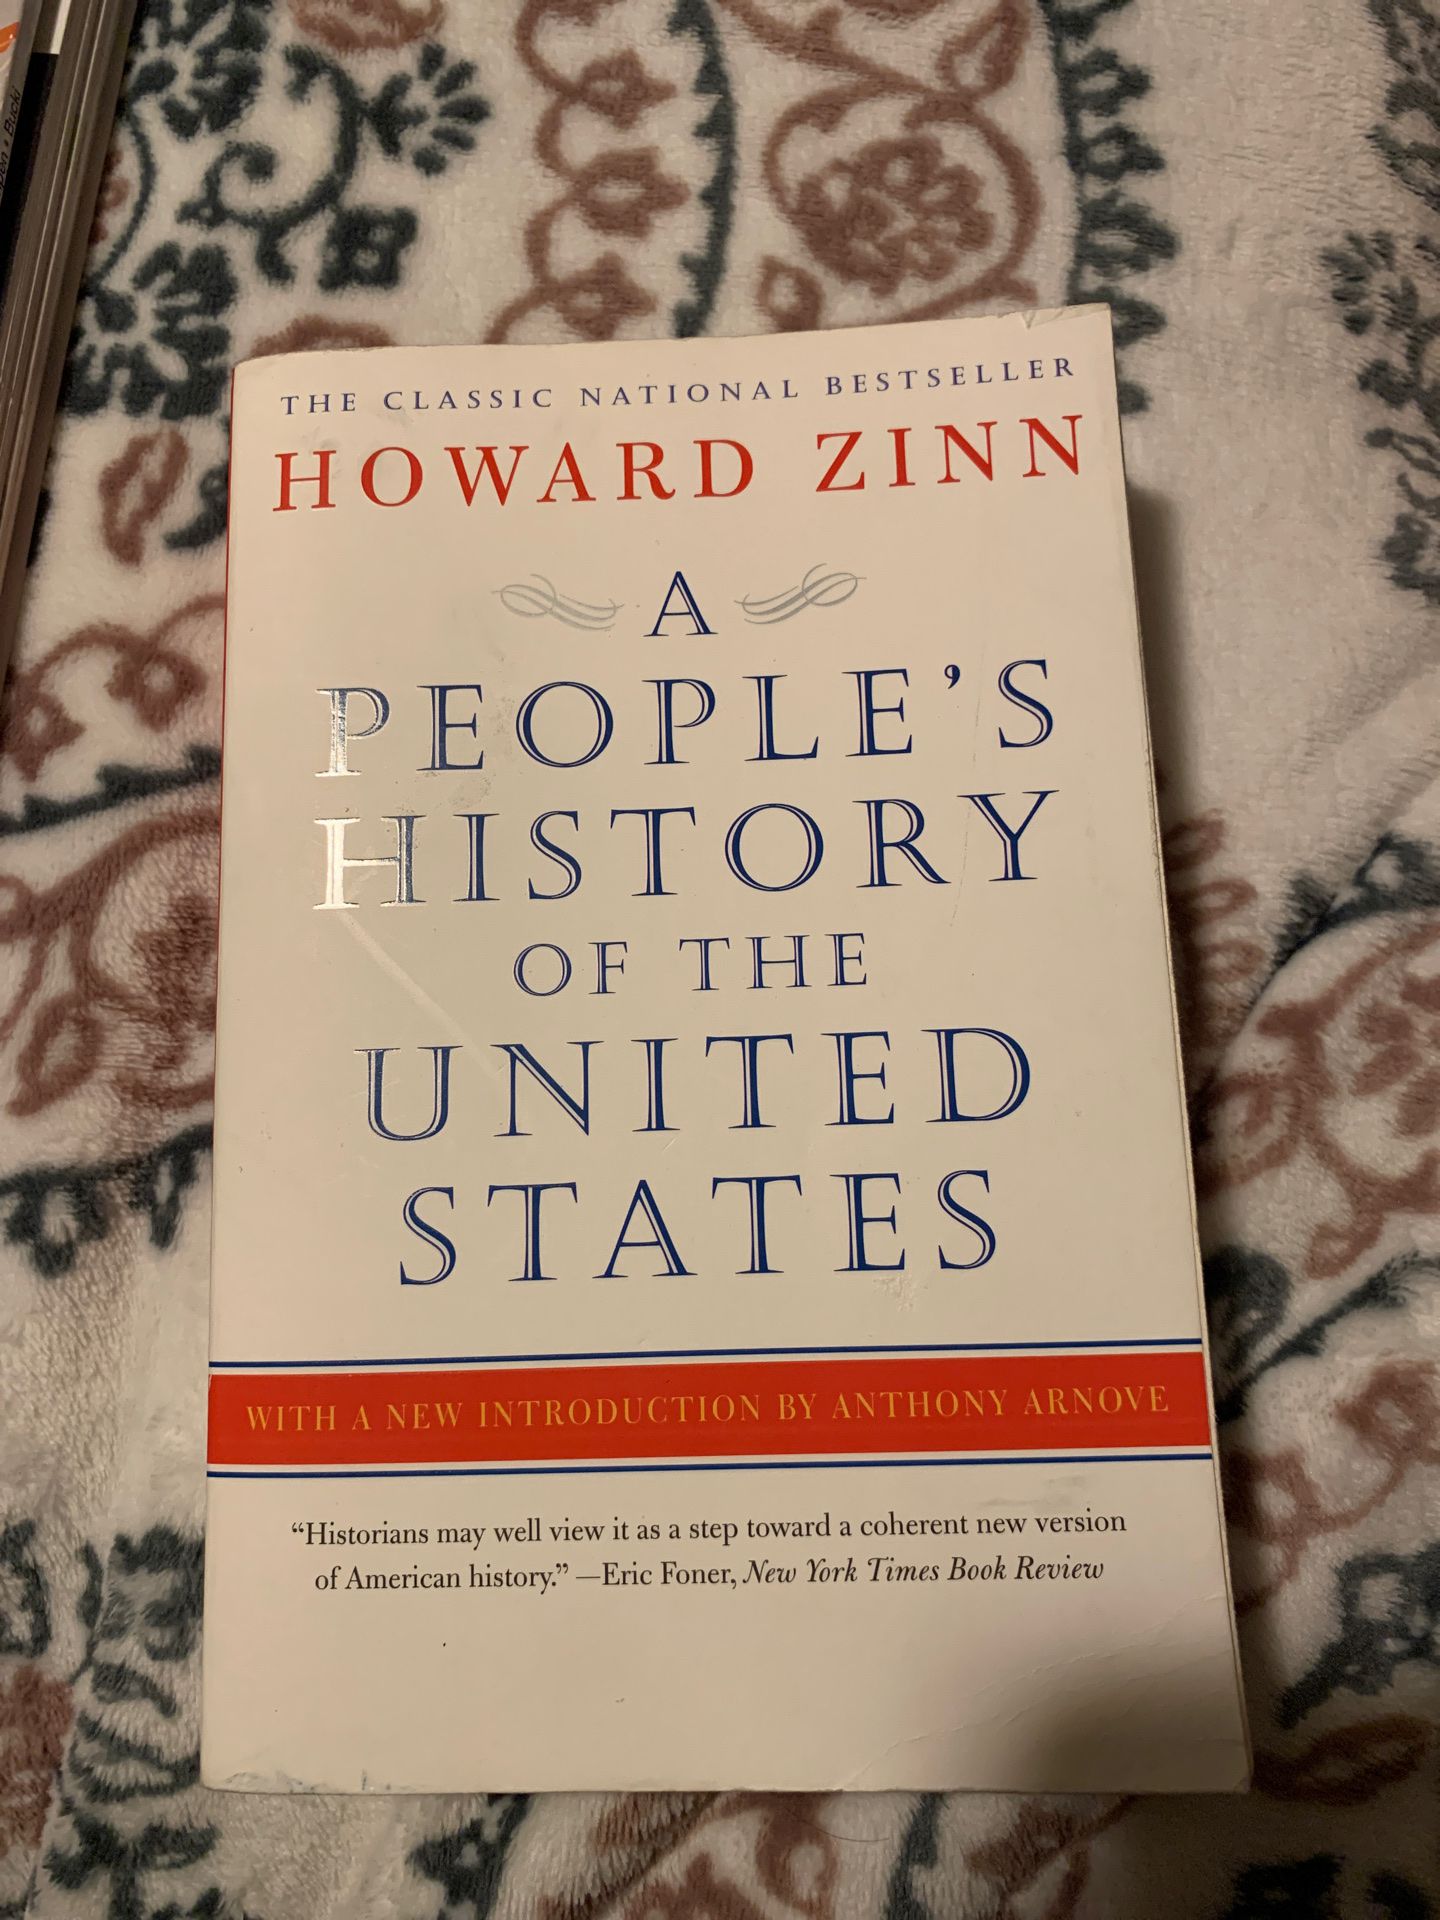 A people’s history of the United States, by Howard Zinn